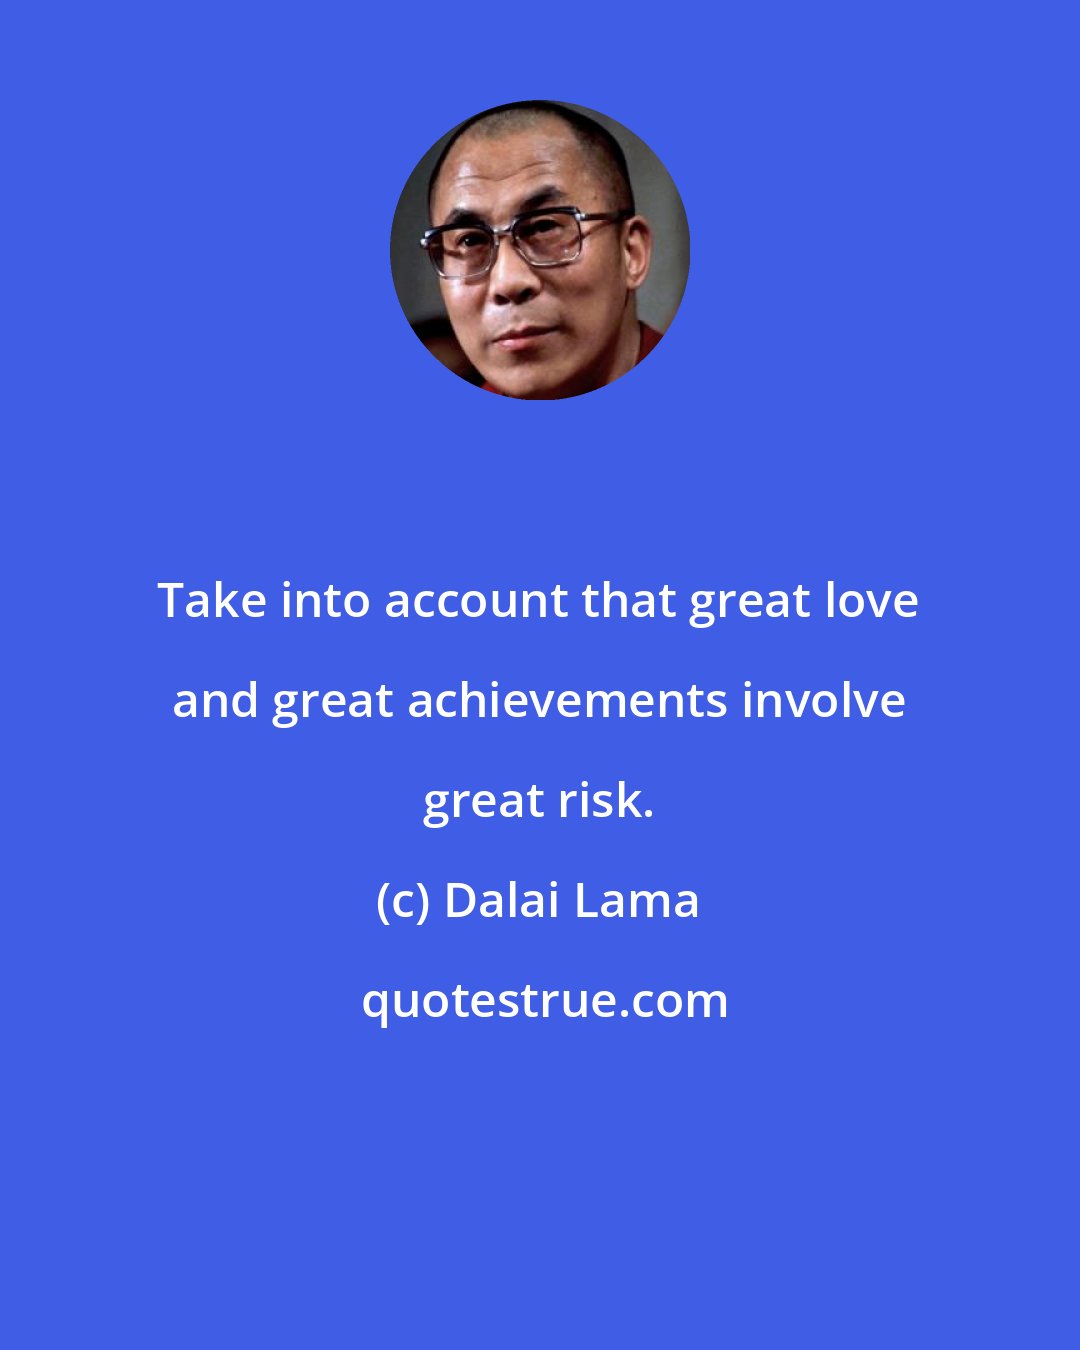 Dalai Lama: Take into account that great love and great achievements involve great risk.